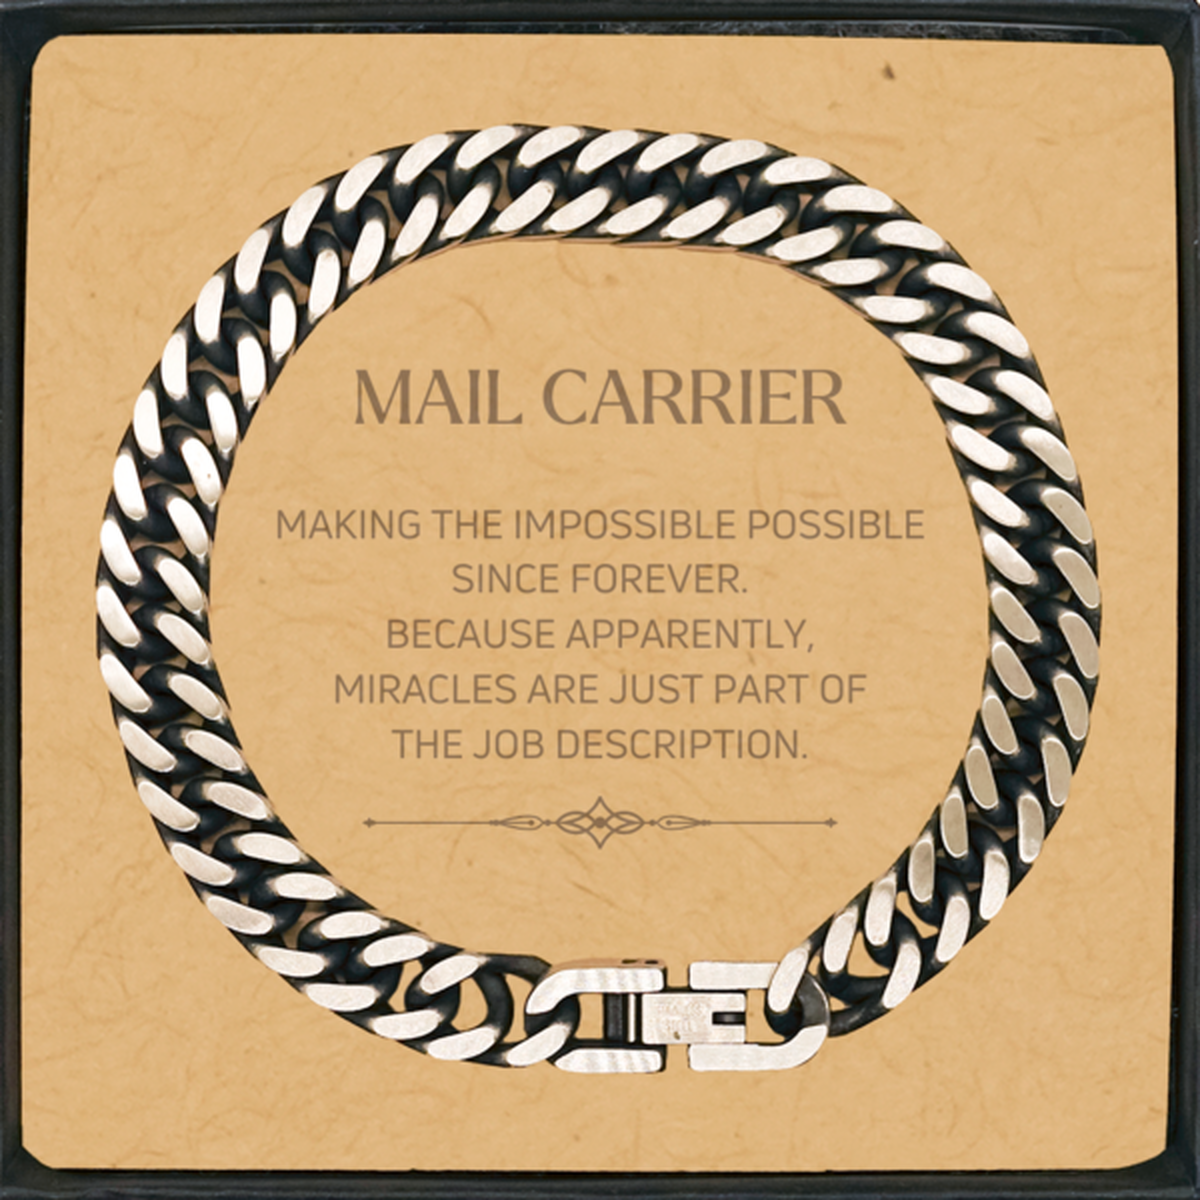 Funny Mail Carrier Gifts, Miracles are just part of the job description, Inspirational Birthday Cuban Link Chain Bracelet For Mail Carrier, Men, Women, Coworkers, Friends, Boss